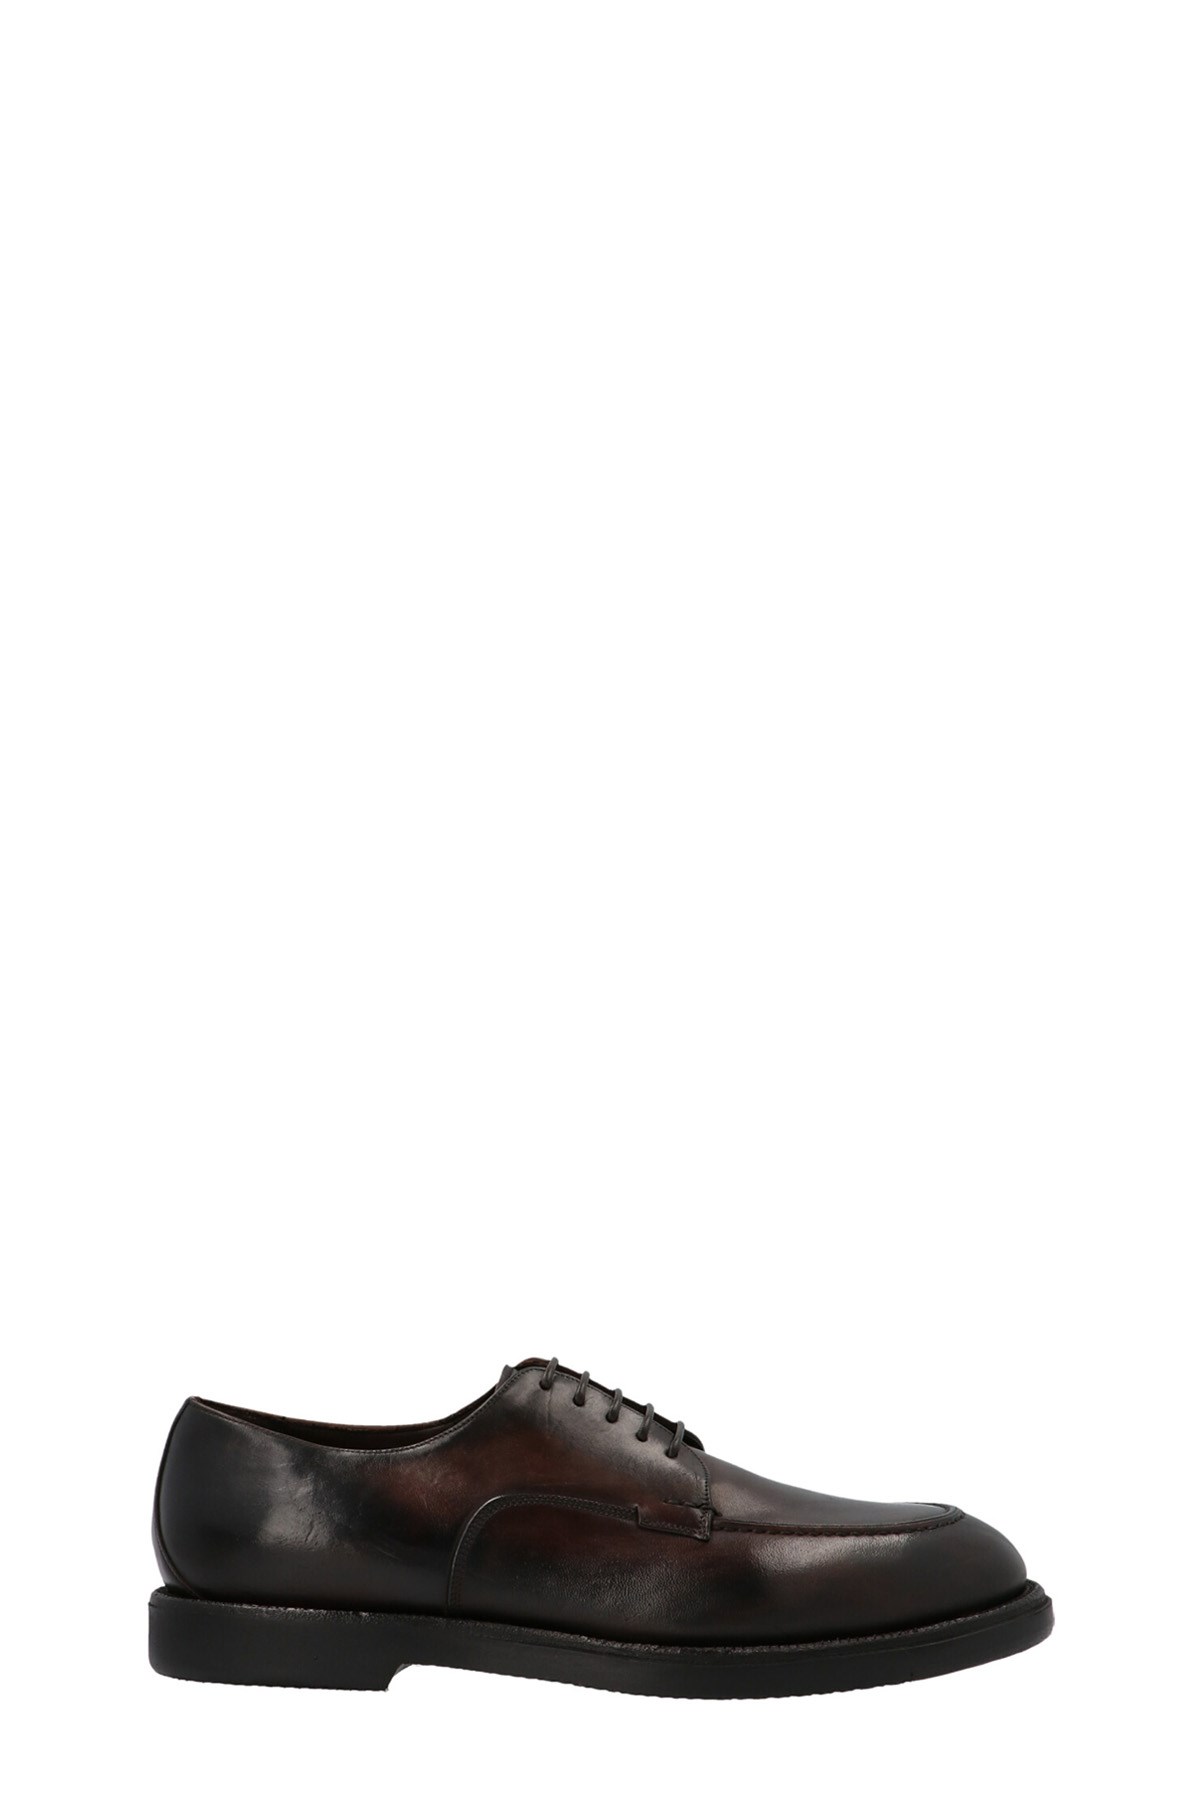 SILVANO SASSETTI Ombre Leather Loafers